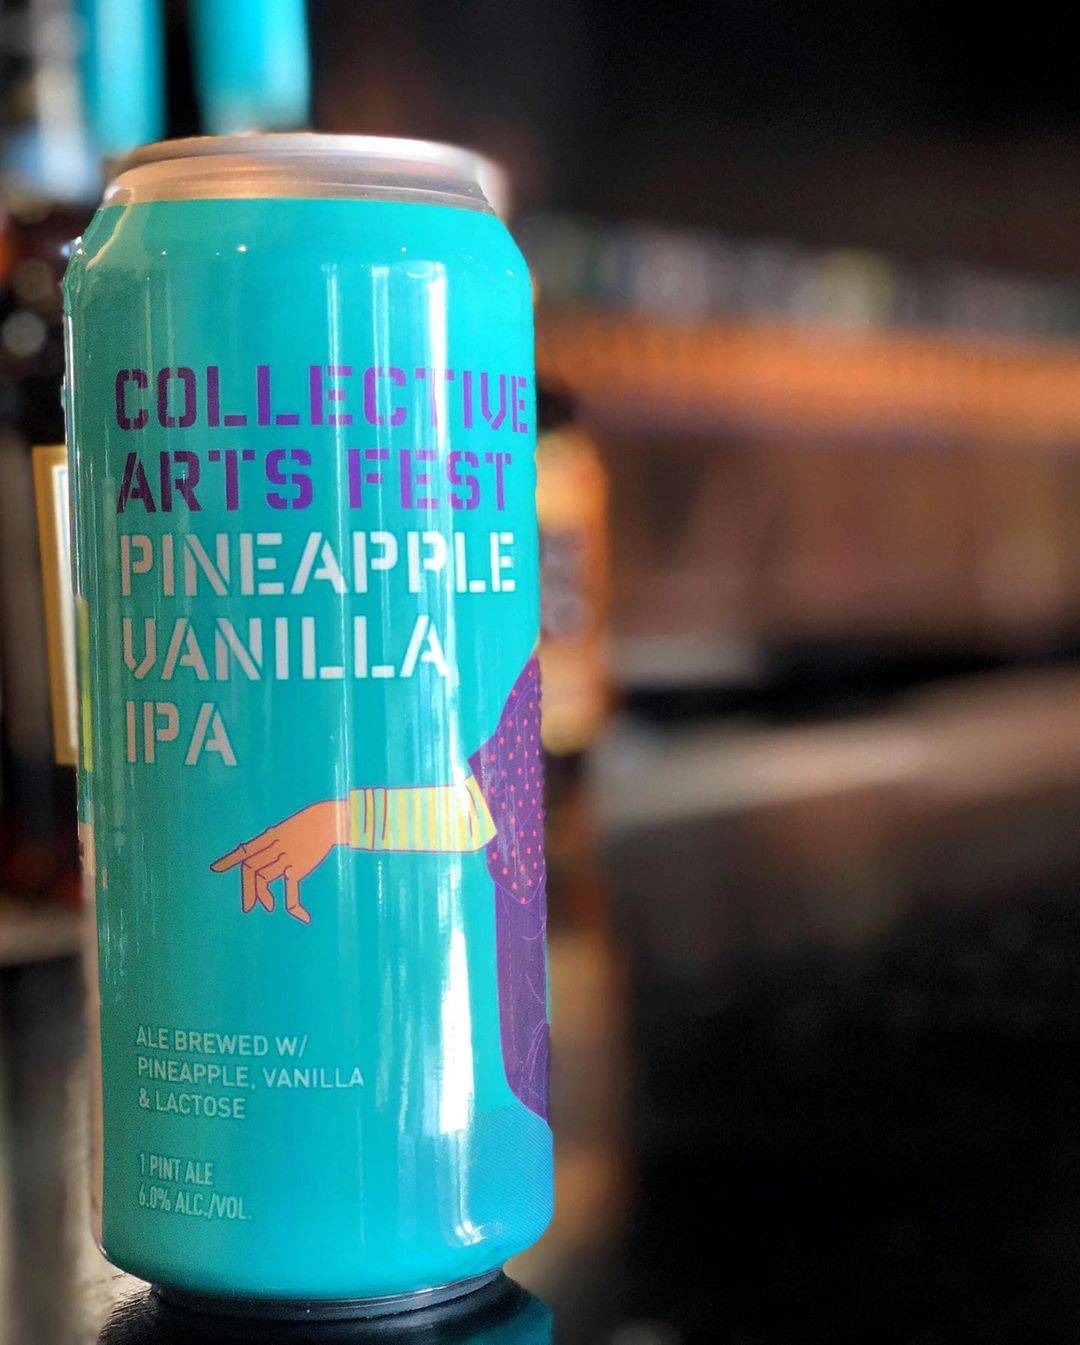 A close up of a pineapple vanilla IPA. Photo by Collective Pour.